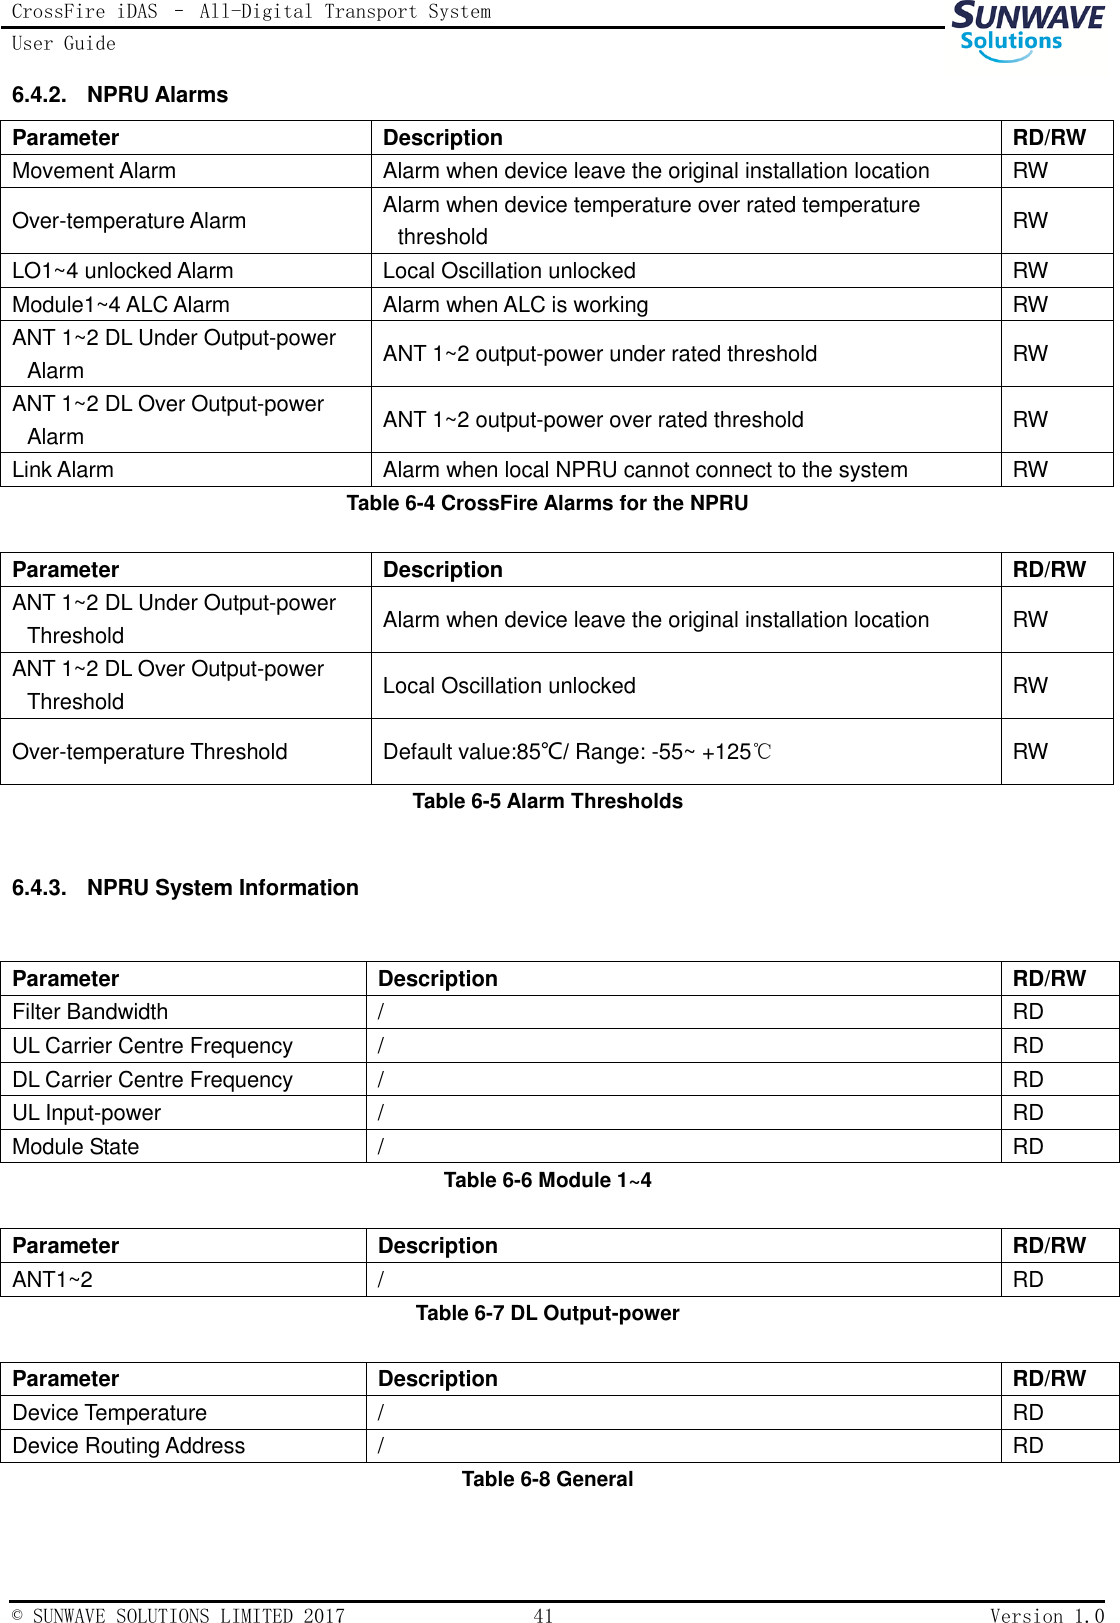 CrossFire iDAS – All-Digital Transport System User Guide   © SUNWAVE SOLUTIONS LIMITED 2017  41  Version 1.0  6.4.2.  NPRU Alarms Parameter Description RD/RW Movement Alarm Alarm when device leave the original installation location RW Over-temperature Alarm Alarm when device temperature over rated temperature threshold RW LO1~4 unlocked Alarm Local Oscillation unlocked RW Module1~4 ALC Alarm Alarm when ALC is working RW ANT 1~2 DL Under Output-power Alarm ANT 1~2 output-power under rated threshold RW ANT 1~2 DL Over Output-power Alarm ANT 1~2 output-power over rated threshold RW Link Alarm Alarm when local NPRU cannot connect to the system RW Table 6-4 CrossFire Alarms for the NPRU  Parameter Description RD/RW ANT 1~2 DL Under Output-power Threshold Alarm when device leave the original installation location RW ANT 1~2 DL Over Output-power Threshold Local Oscillation unlocked RW Over-temperature Threshold Default value:85℃/ Range: -55~ +125℃ RW Table 6-5 Alarm Thresholds  6.4.3.  NPRU System Information  Parameter Description RD/RW Filter Bandwidth / RD UL Carrier Centre Frequency / RD DL Carrier Centre Frequency / RD UL Input-power / RD Module State / RD Table 6-6 Module 1~4  Parameter Description RD/RW ANT1~2 / RD Table 6-7 DL Output-power  Parameter Description RD/RW Device Temperature / RD Device Routing Address / RD Table 6-8 General  